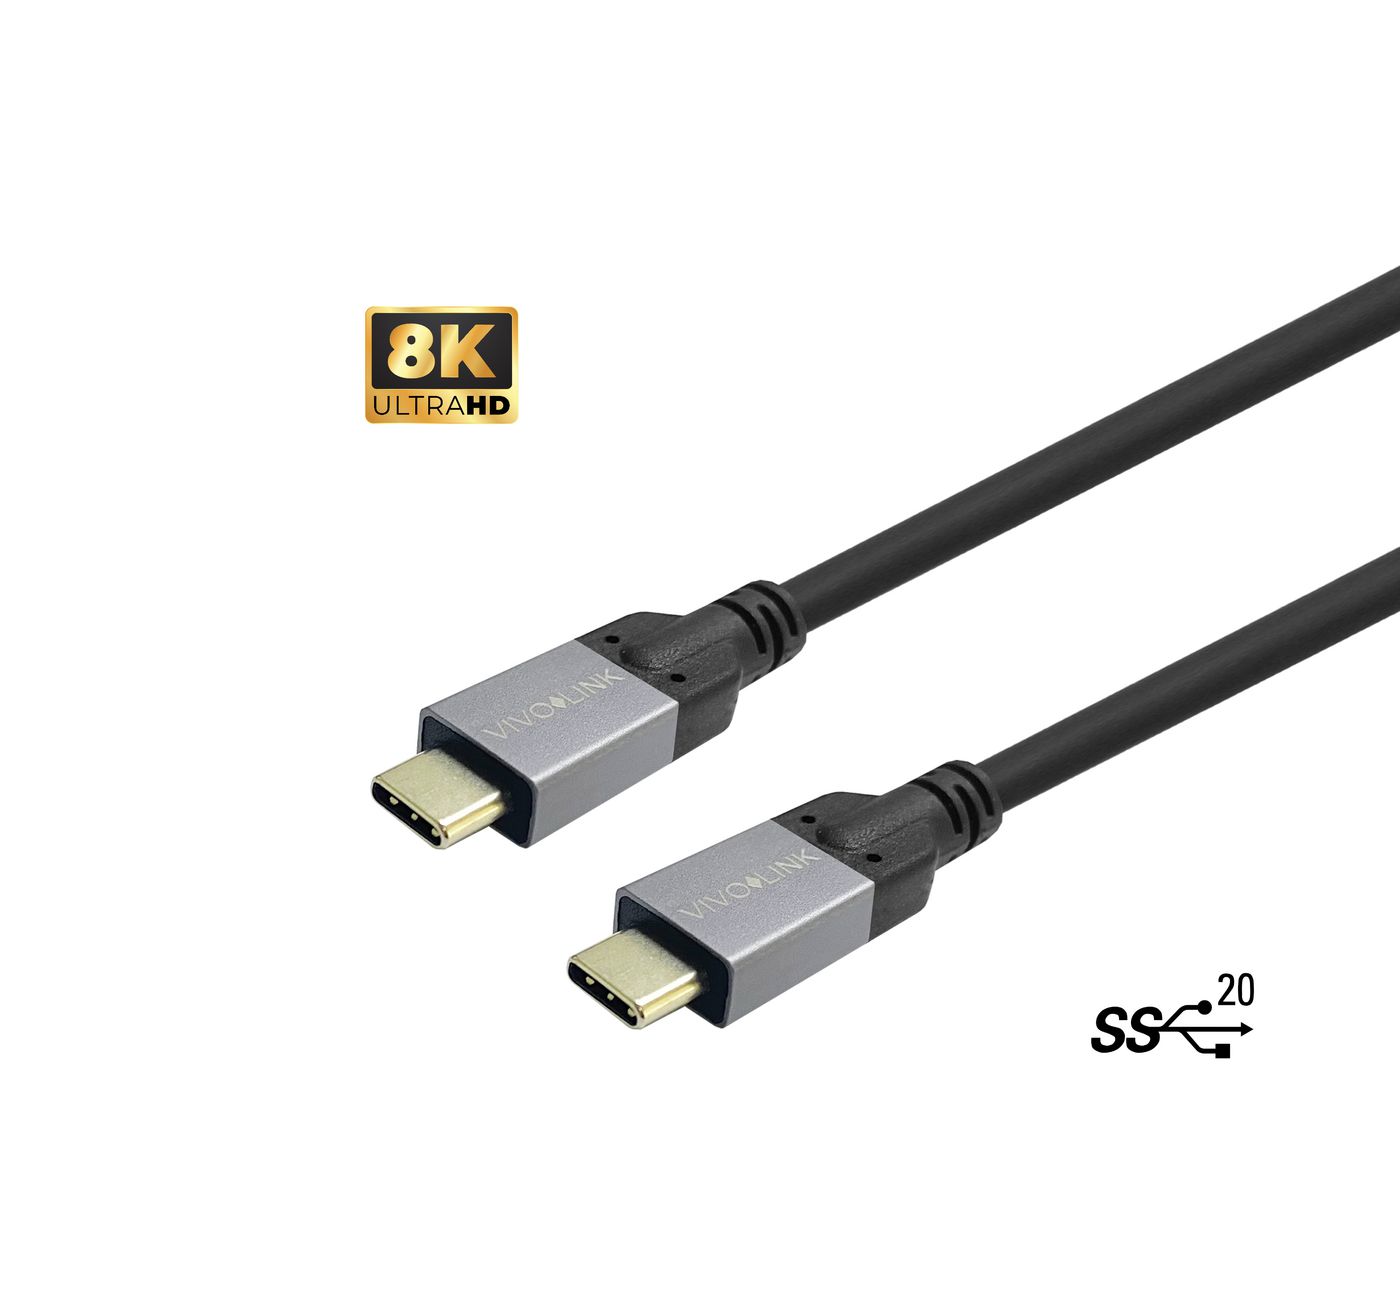 EET USB-C to Cable 0.5m Supports 20 Gbps data - Kabel - Digital/Daten (PROUSBCMM0.5)